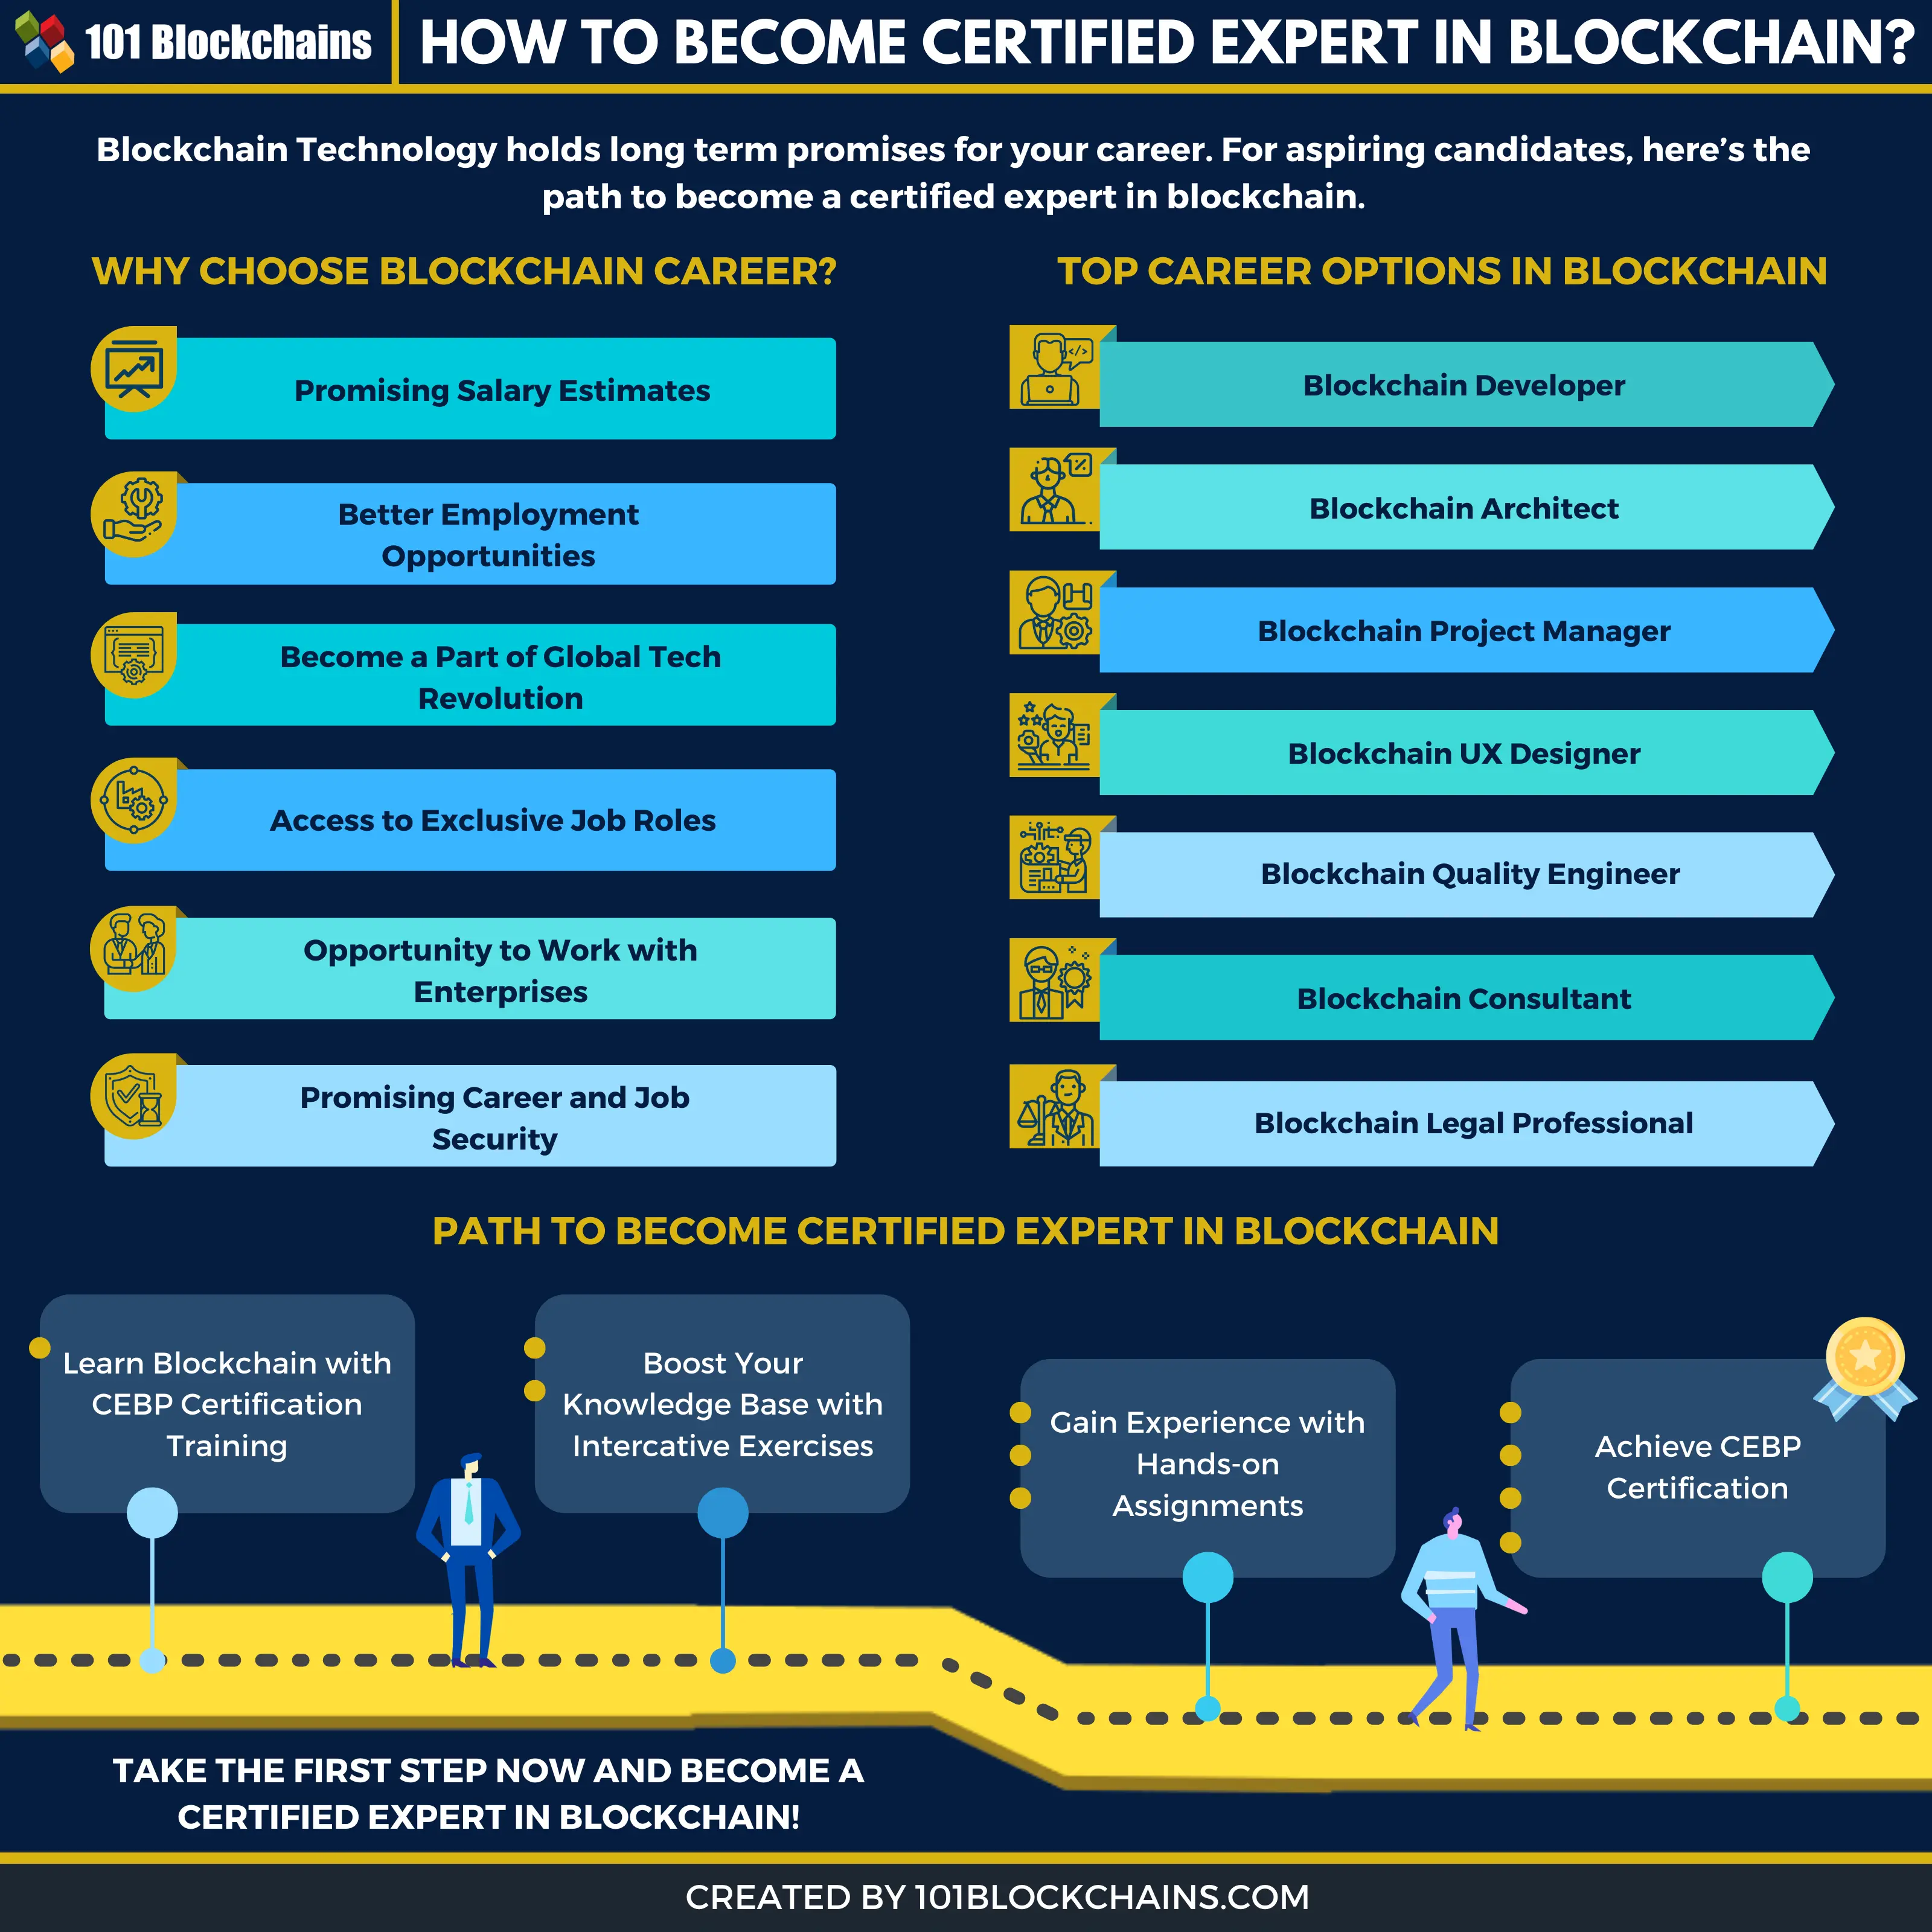 How to Become certified expert in blockchain